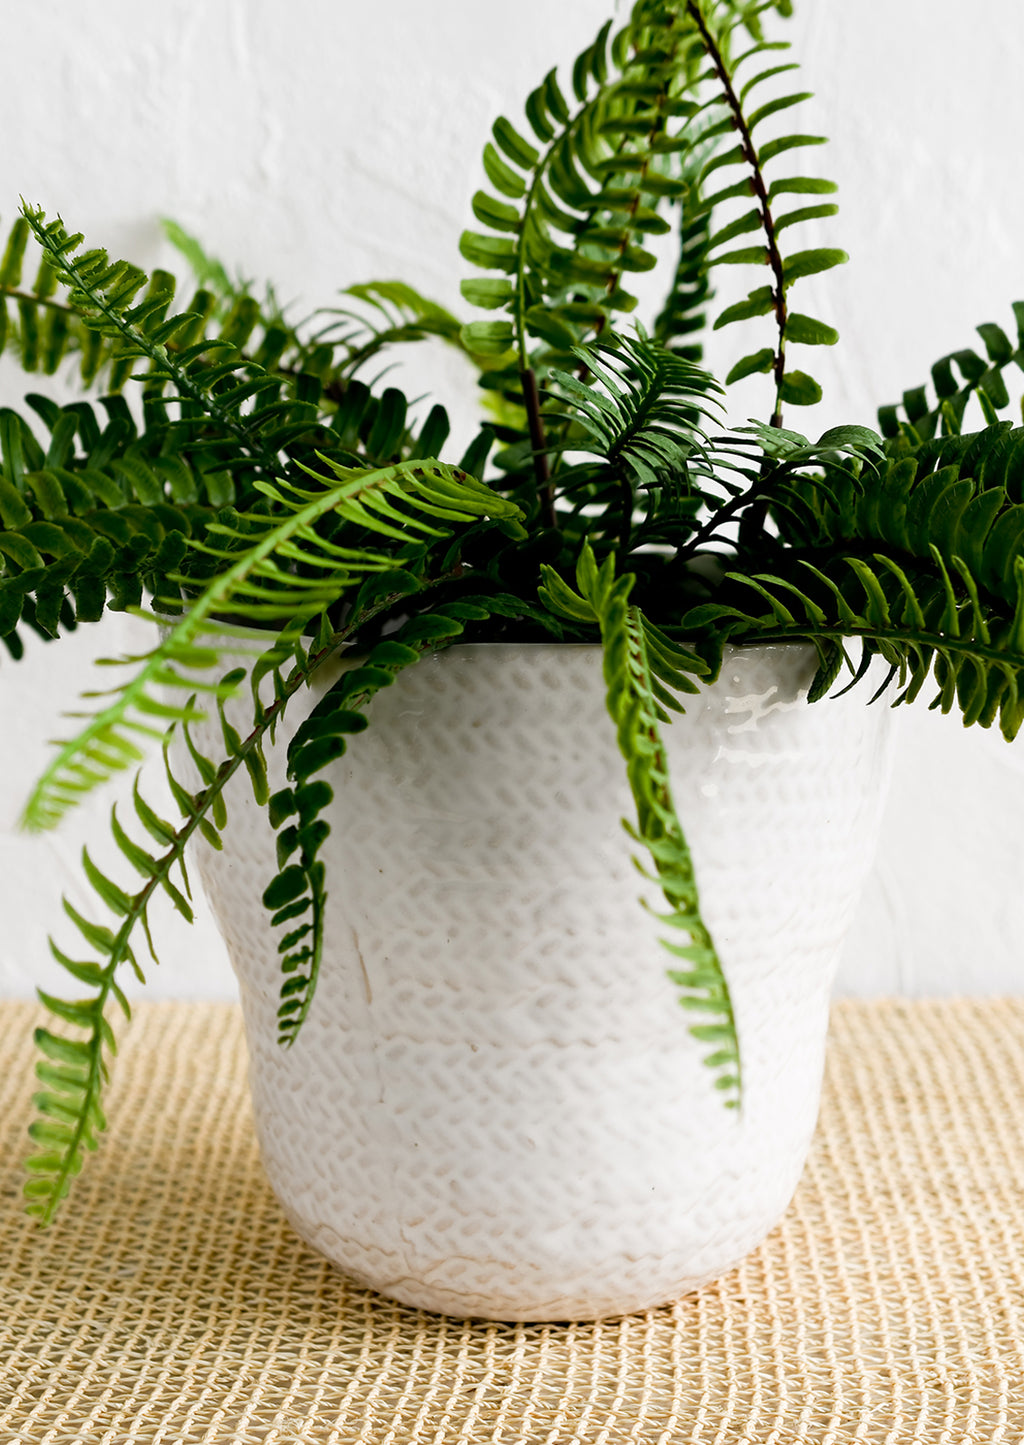 1: A white basketweave planter with fern plant.